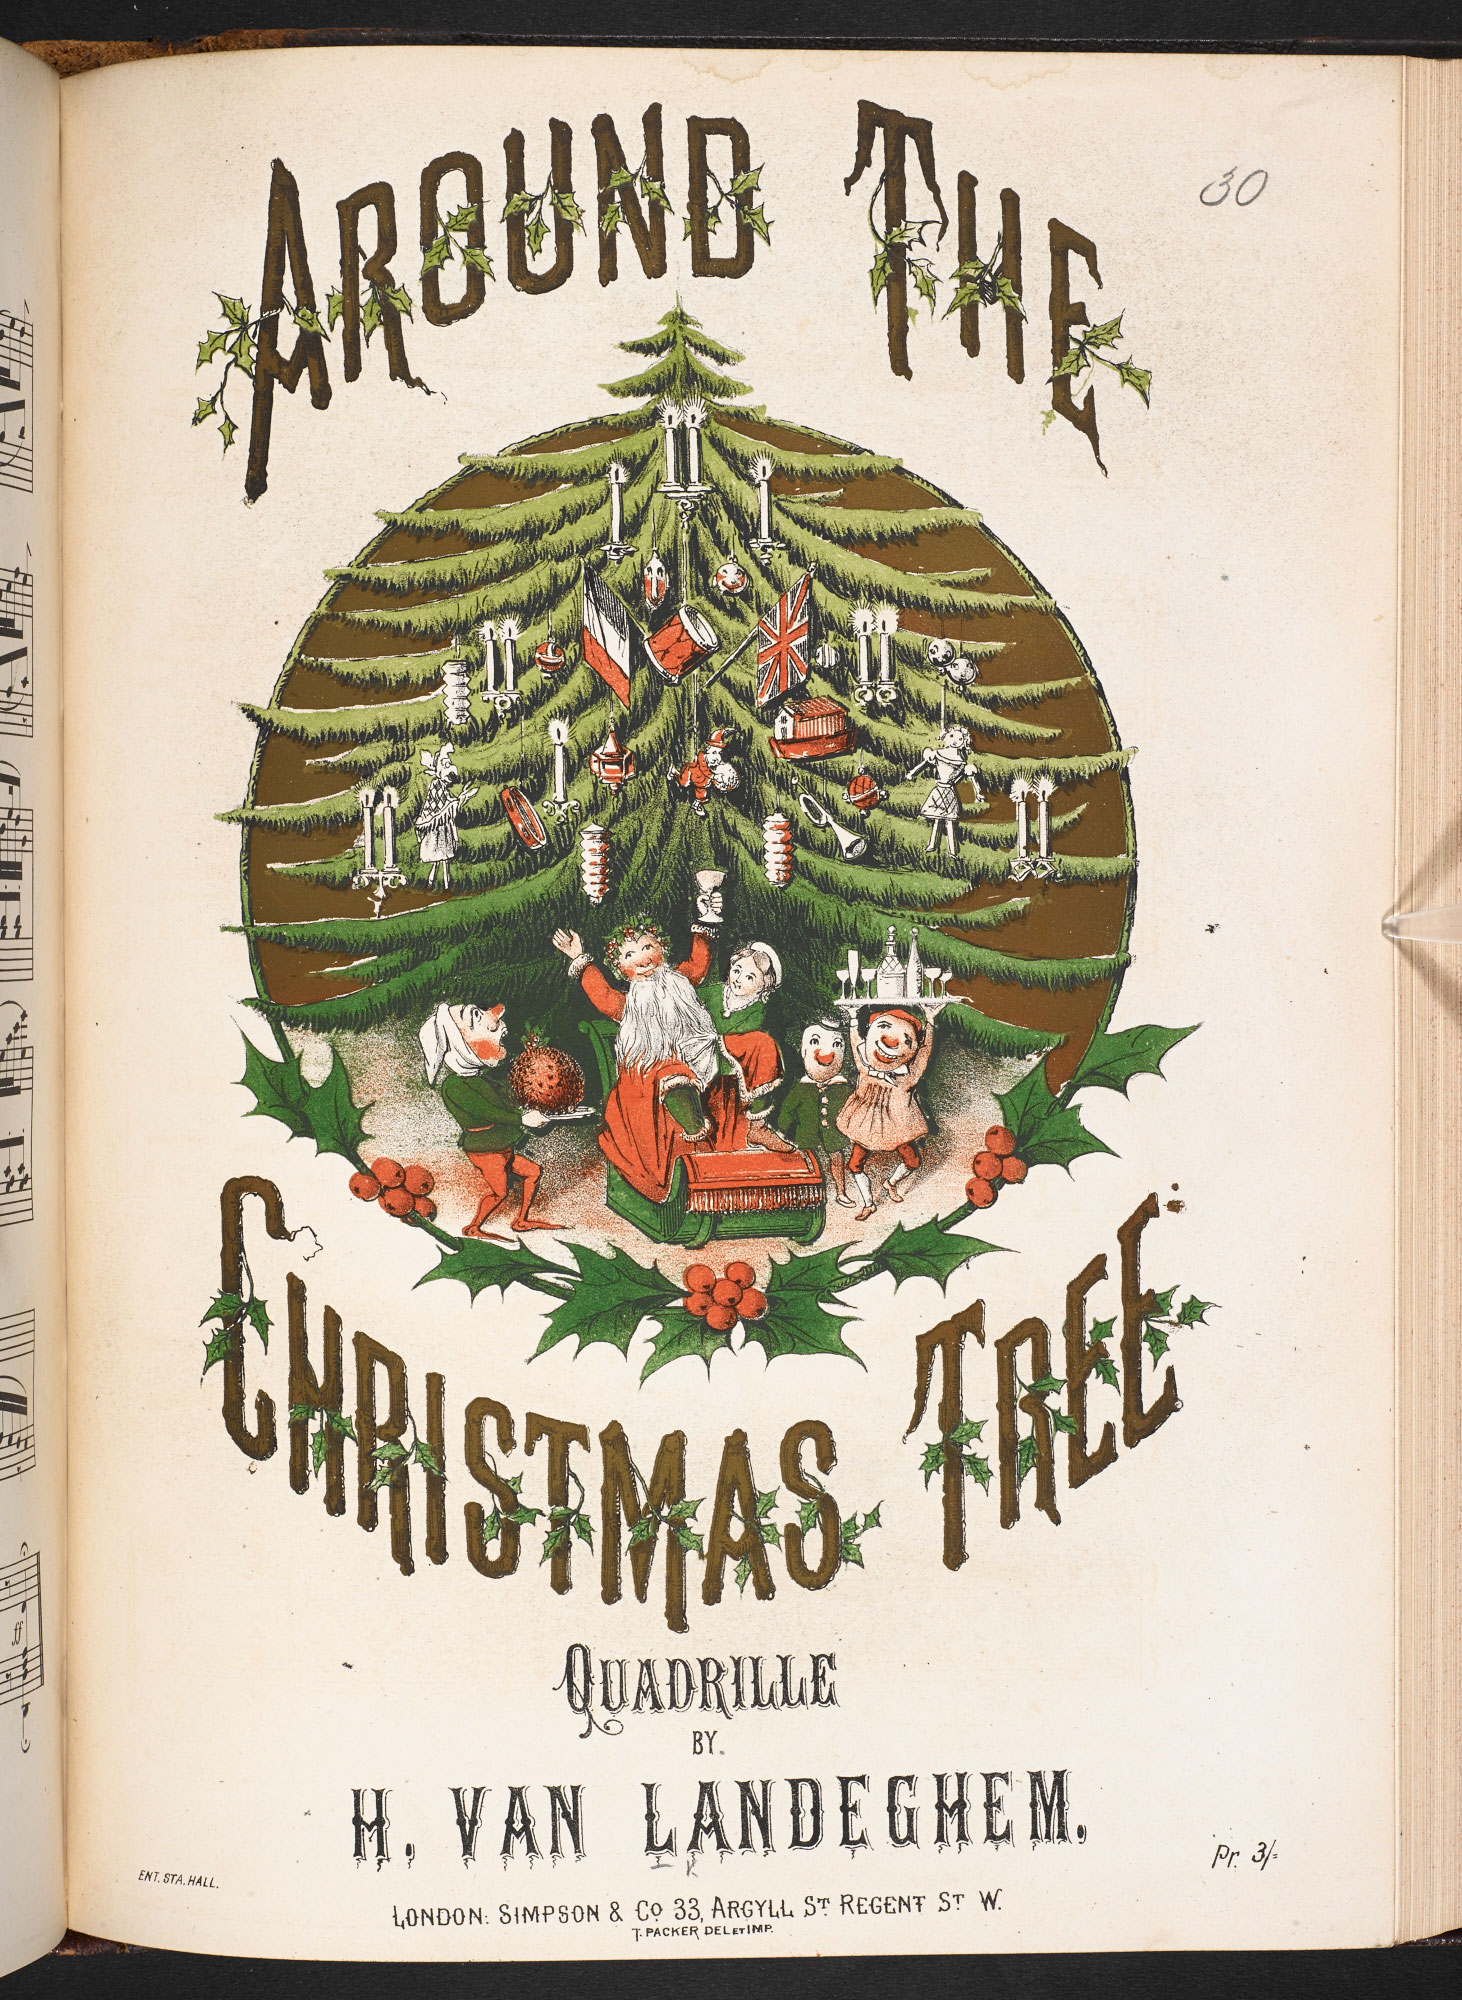 The Influence of Victorian Christmas Practices on Today's Traditions